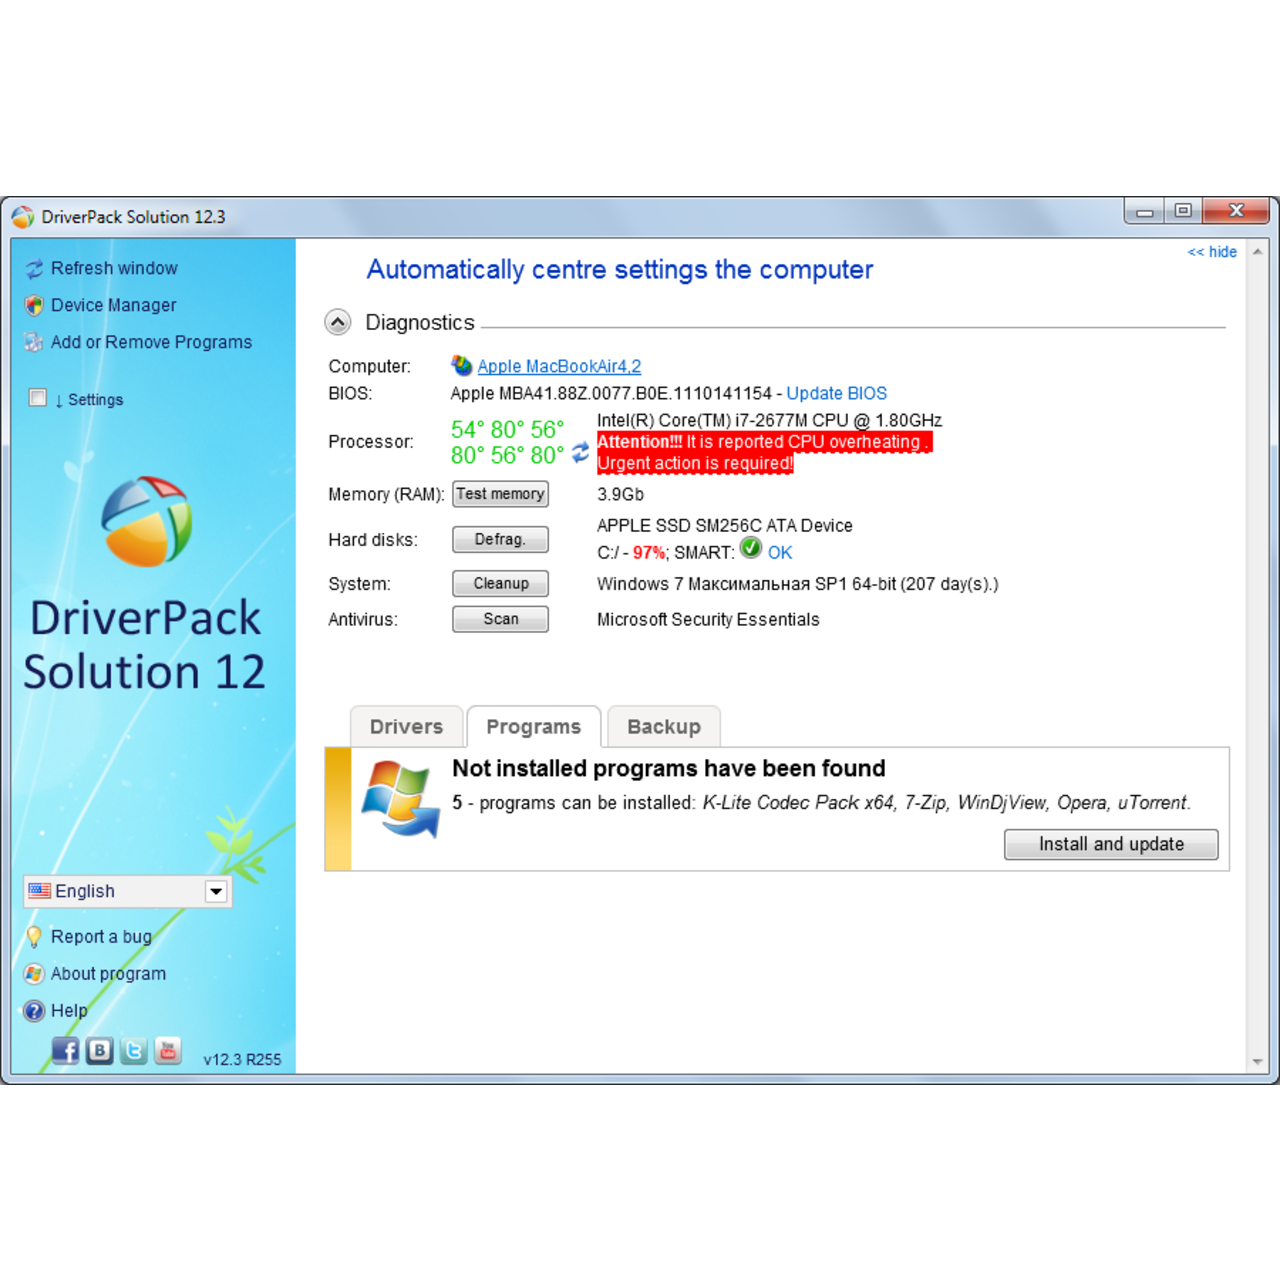 driverpack solution 16 review